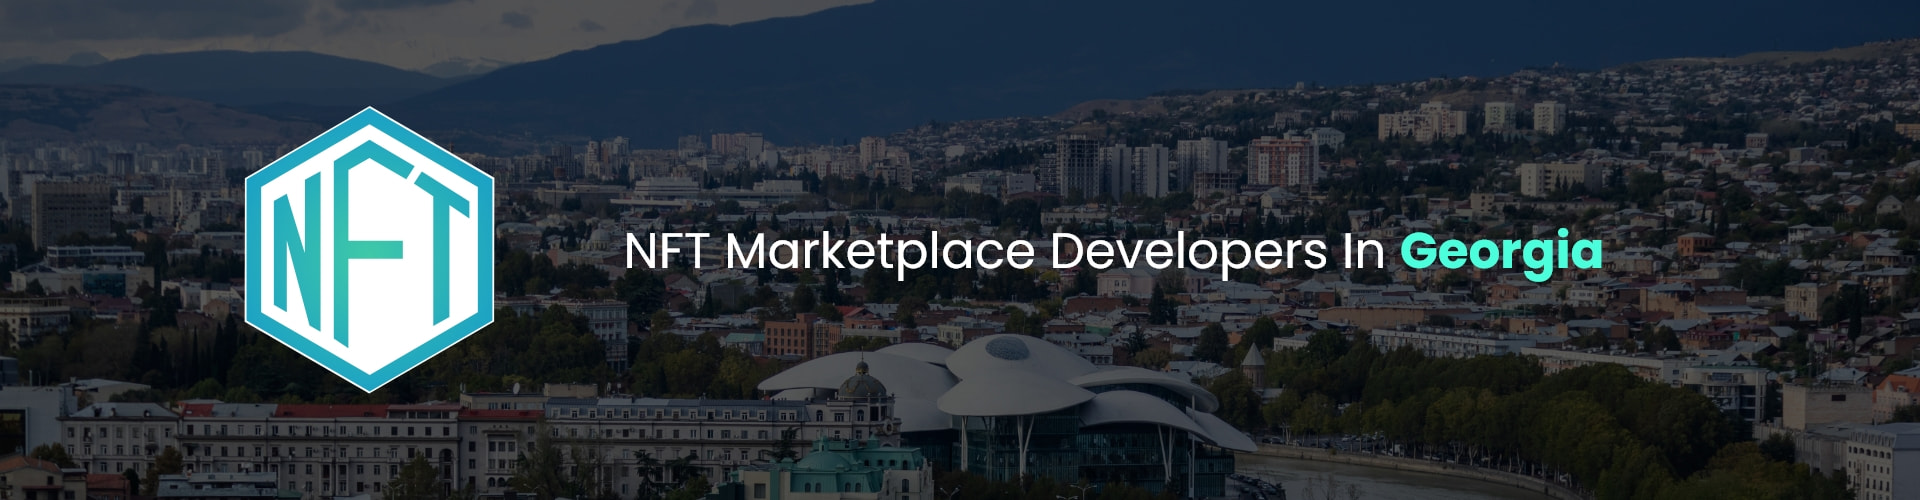 hire nft marketplace developers in georgia